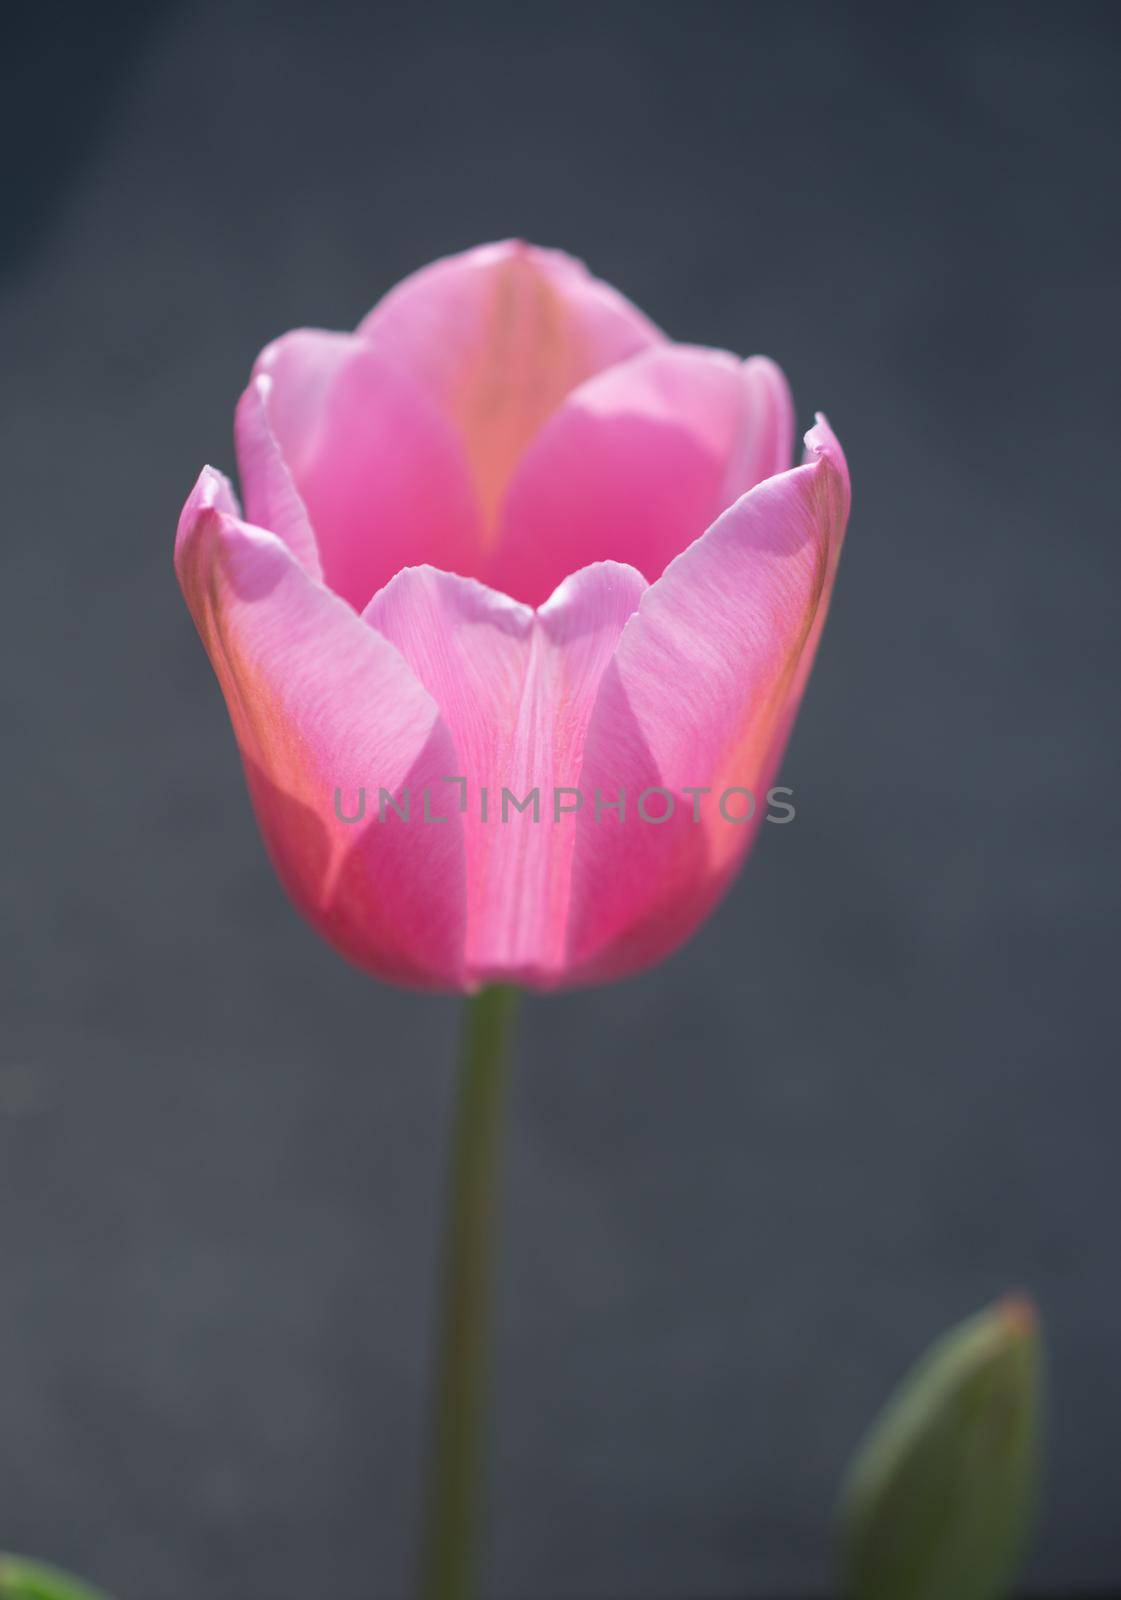 Colorful tulip flower bloom with a colorful background by berkay